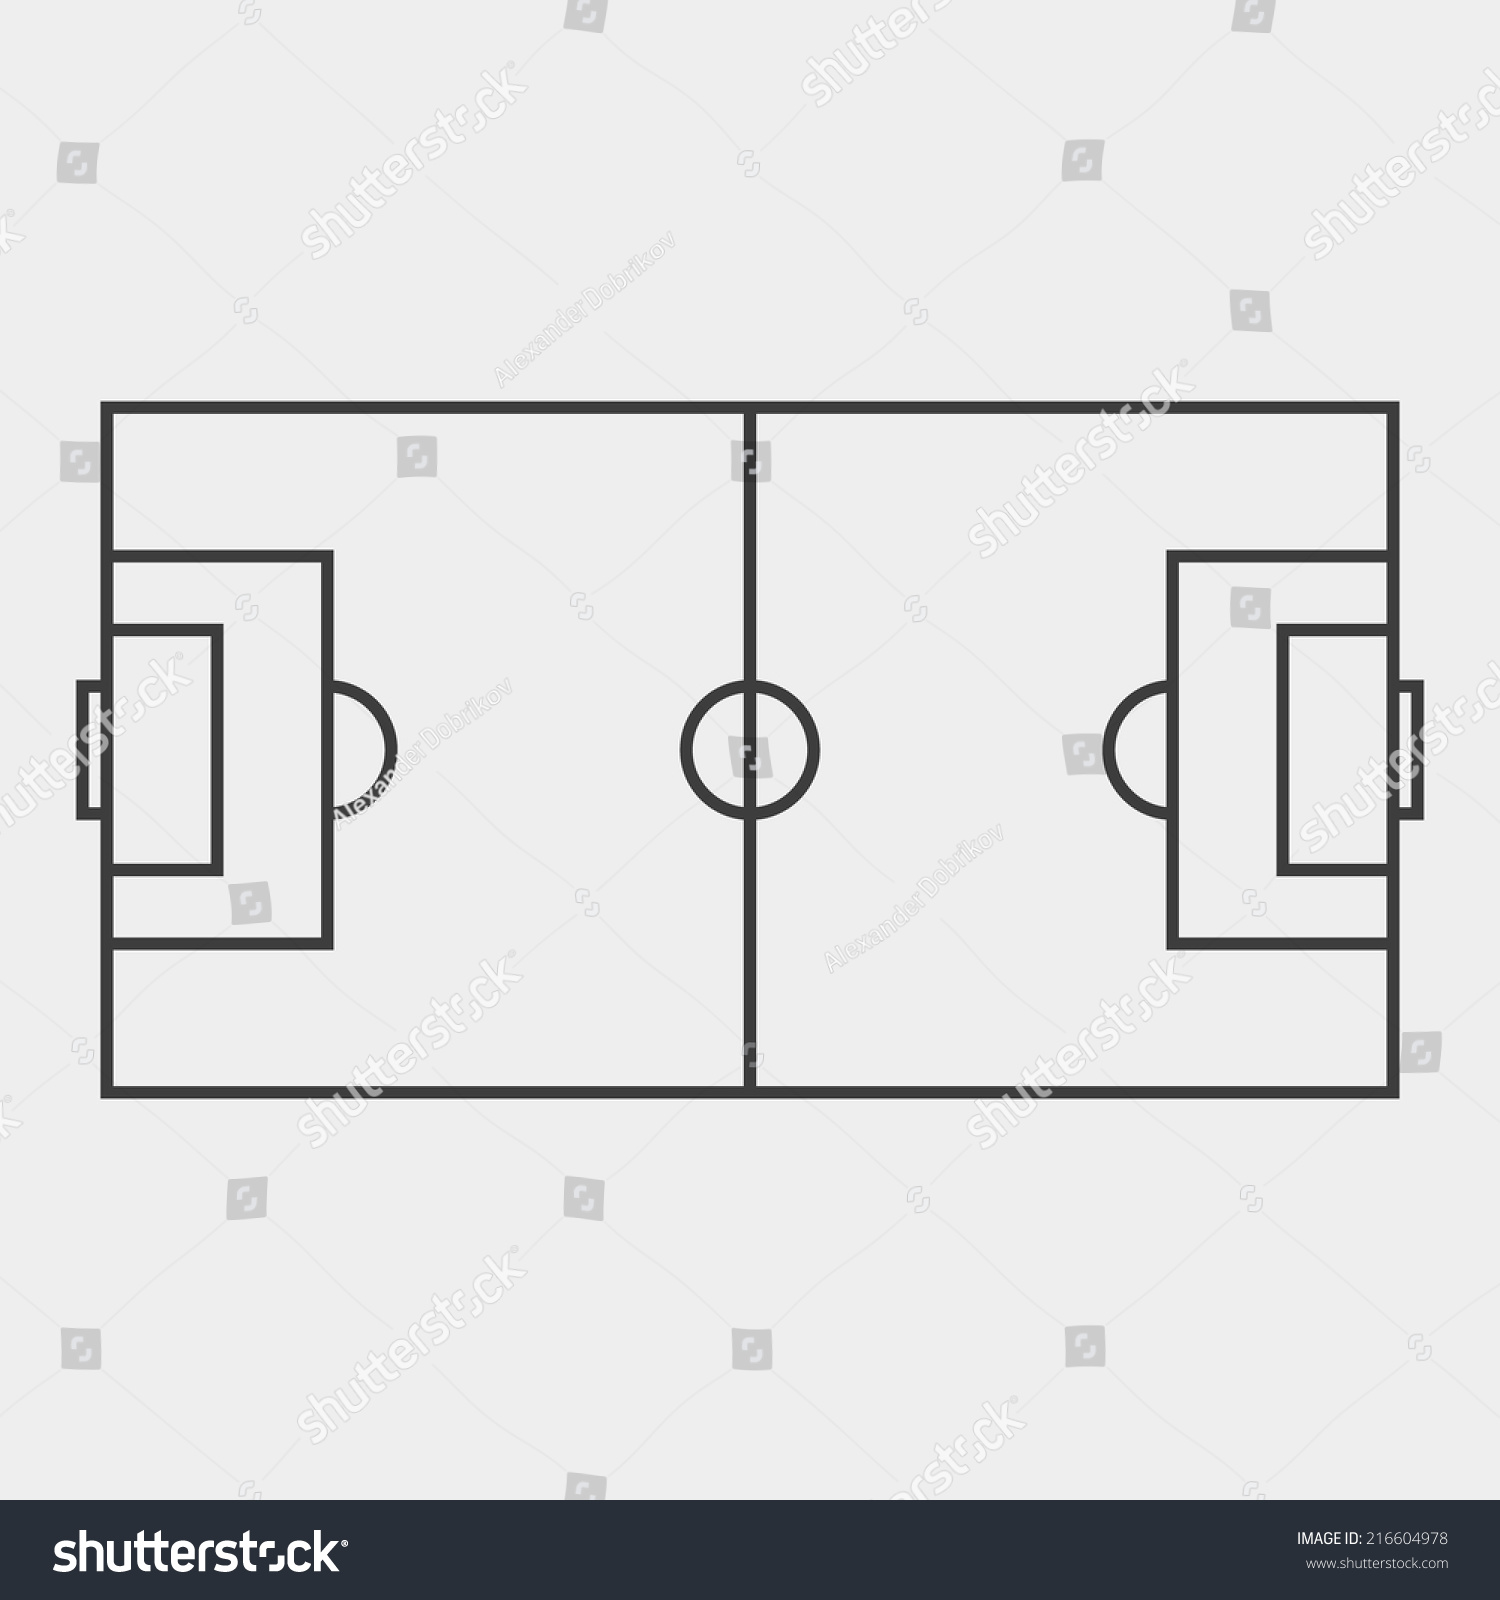 Football Field Black White Concept Outline Stock Vector (Royalty Free ...